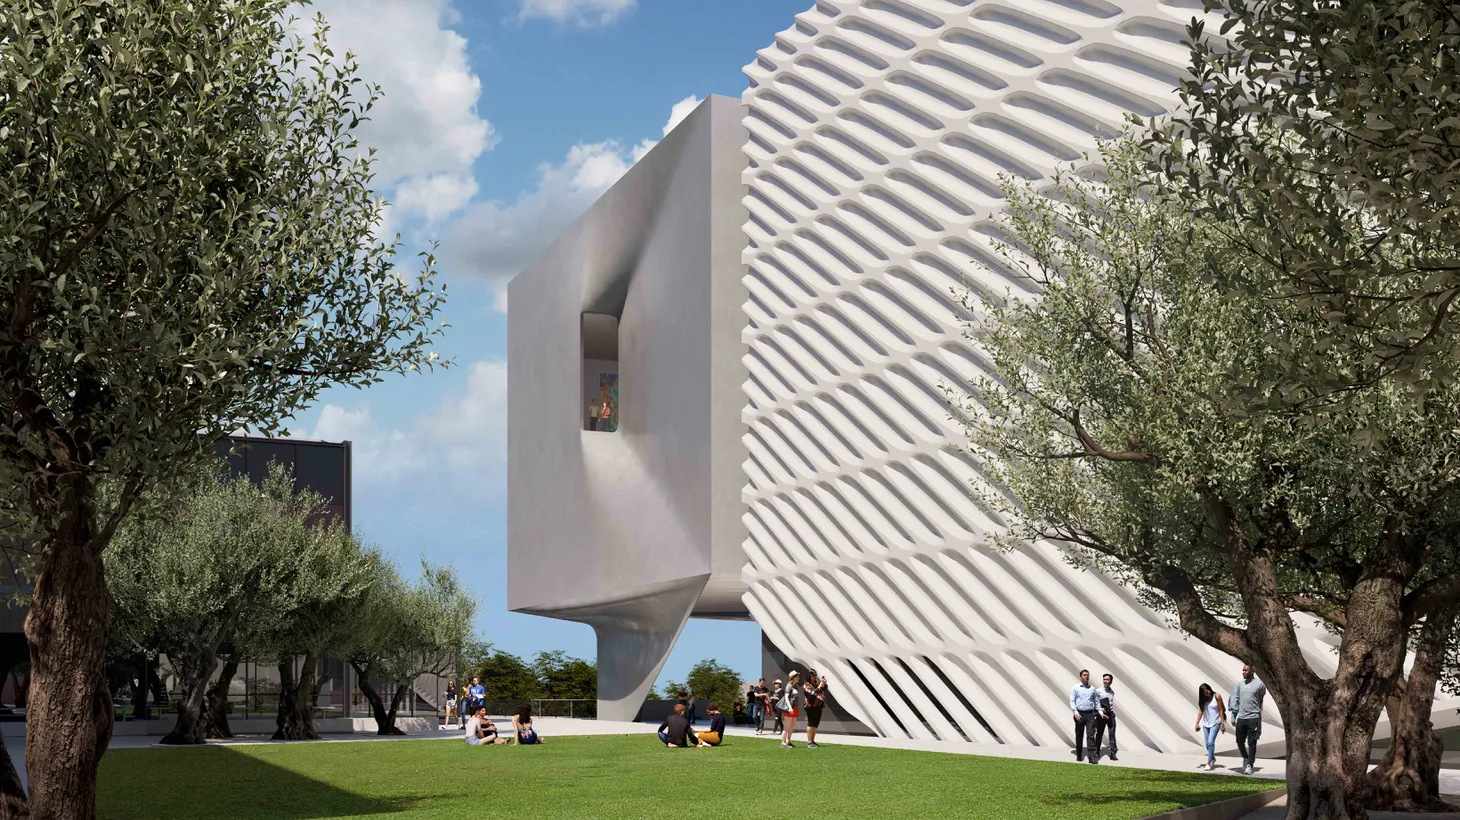 An architectural rendering shows how the planned expansion of The Broad contemporary art museum will connect to the existing structure with a plaza next to it. The expansion is one of two just-announced major investments in Downtown LA’s Grand Avenue arts scene.